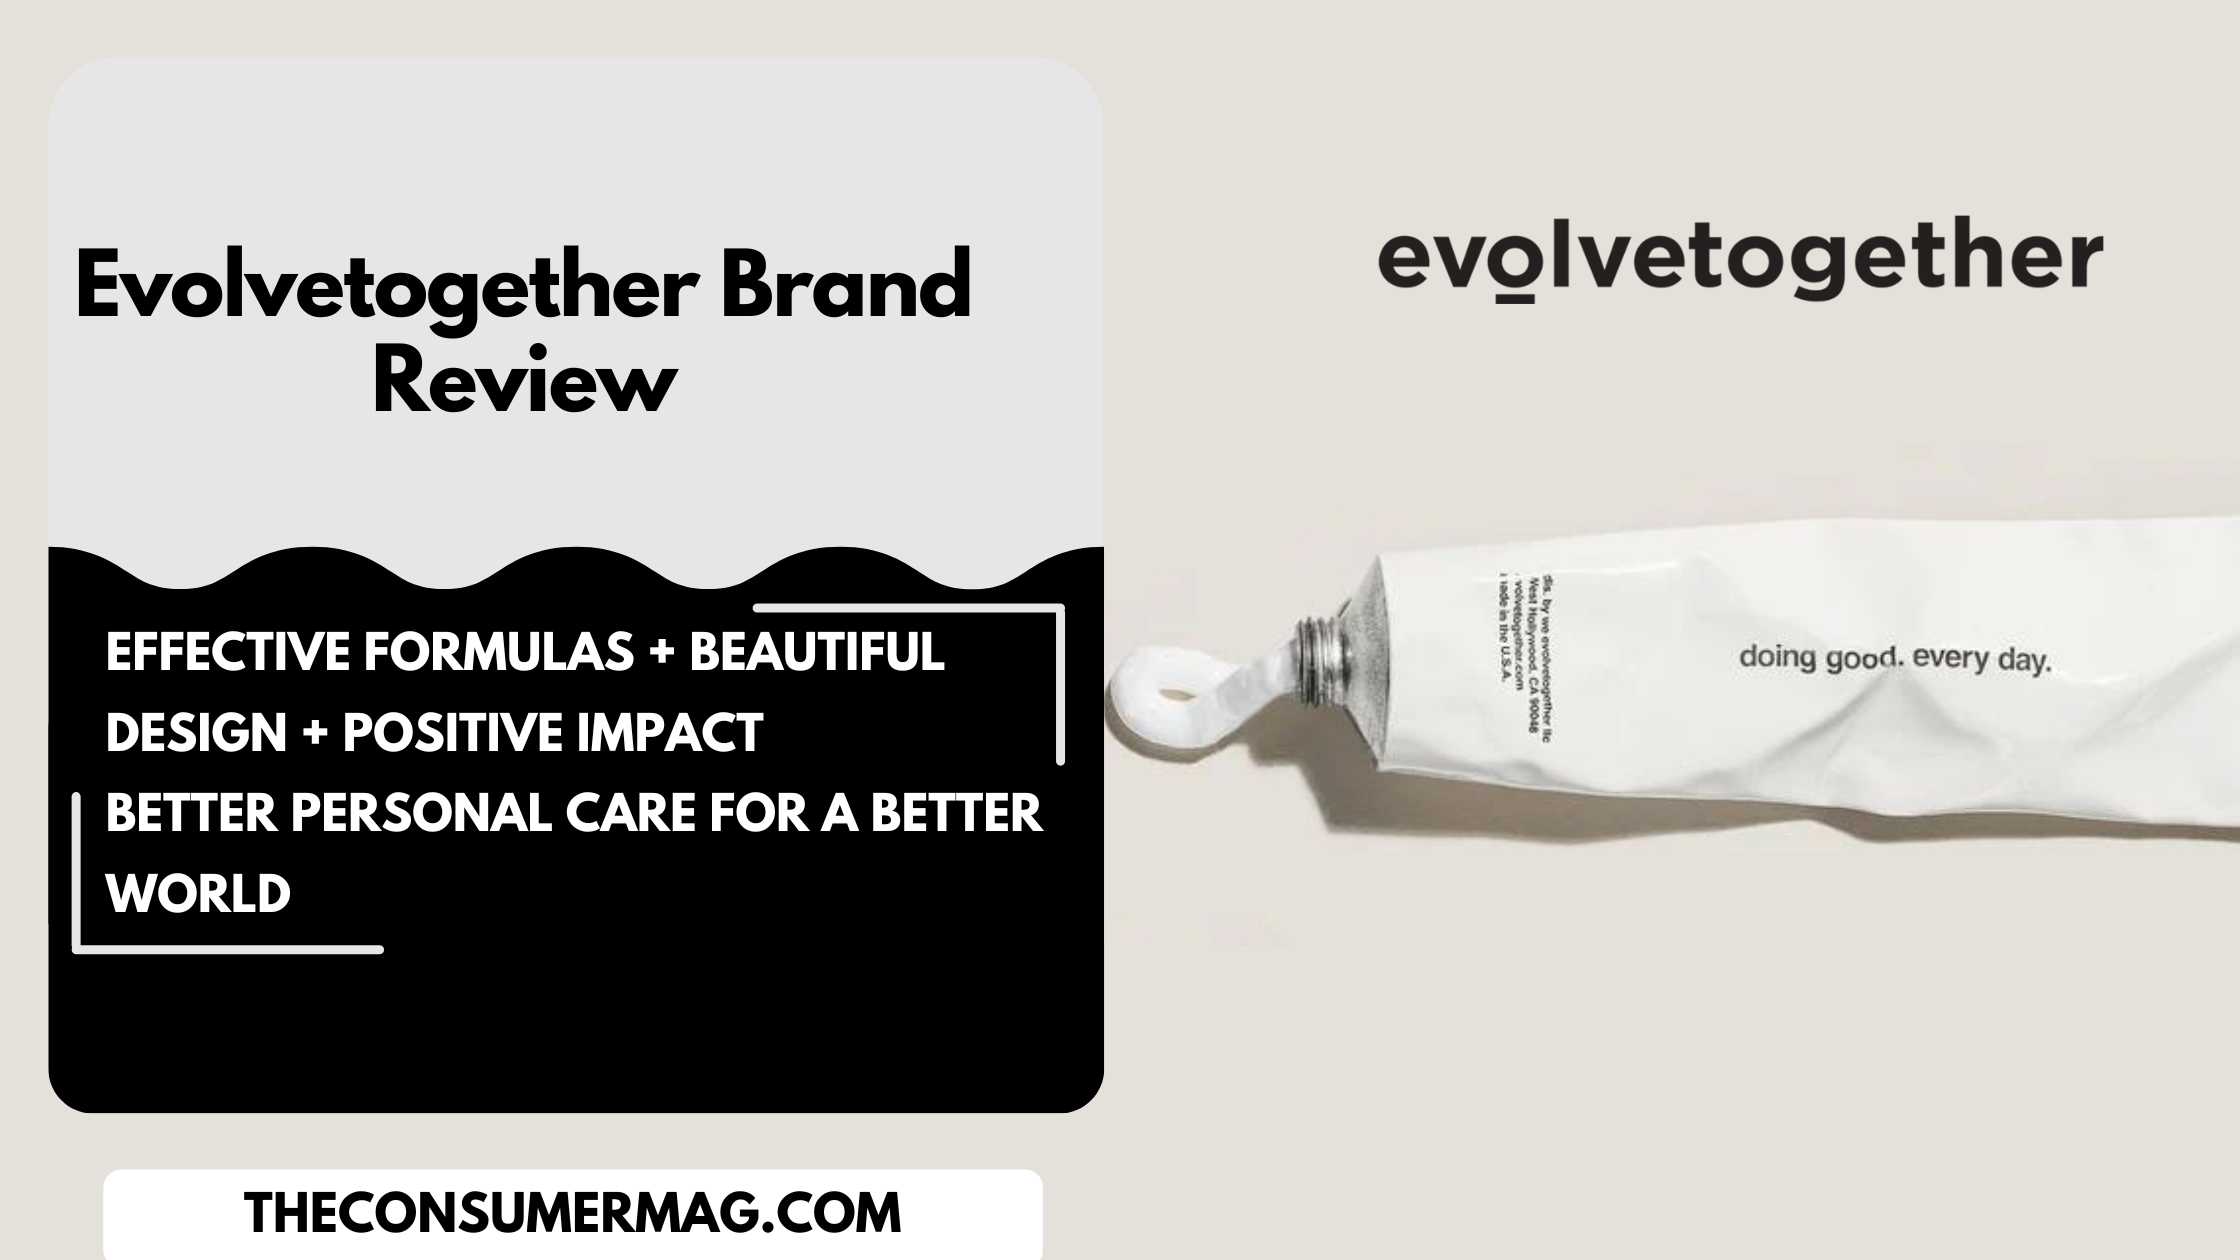 evolvetogather brand featured image